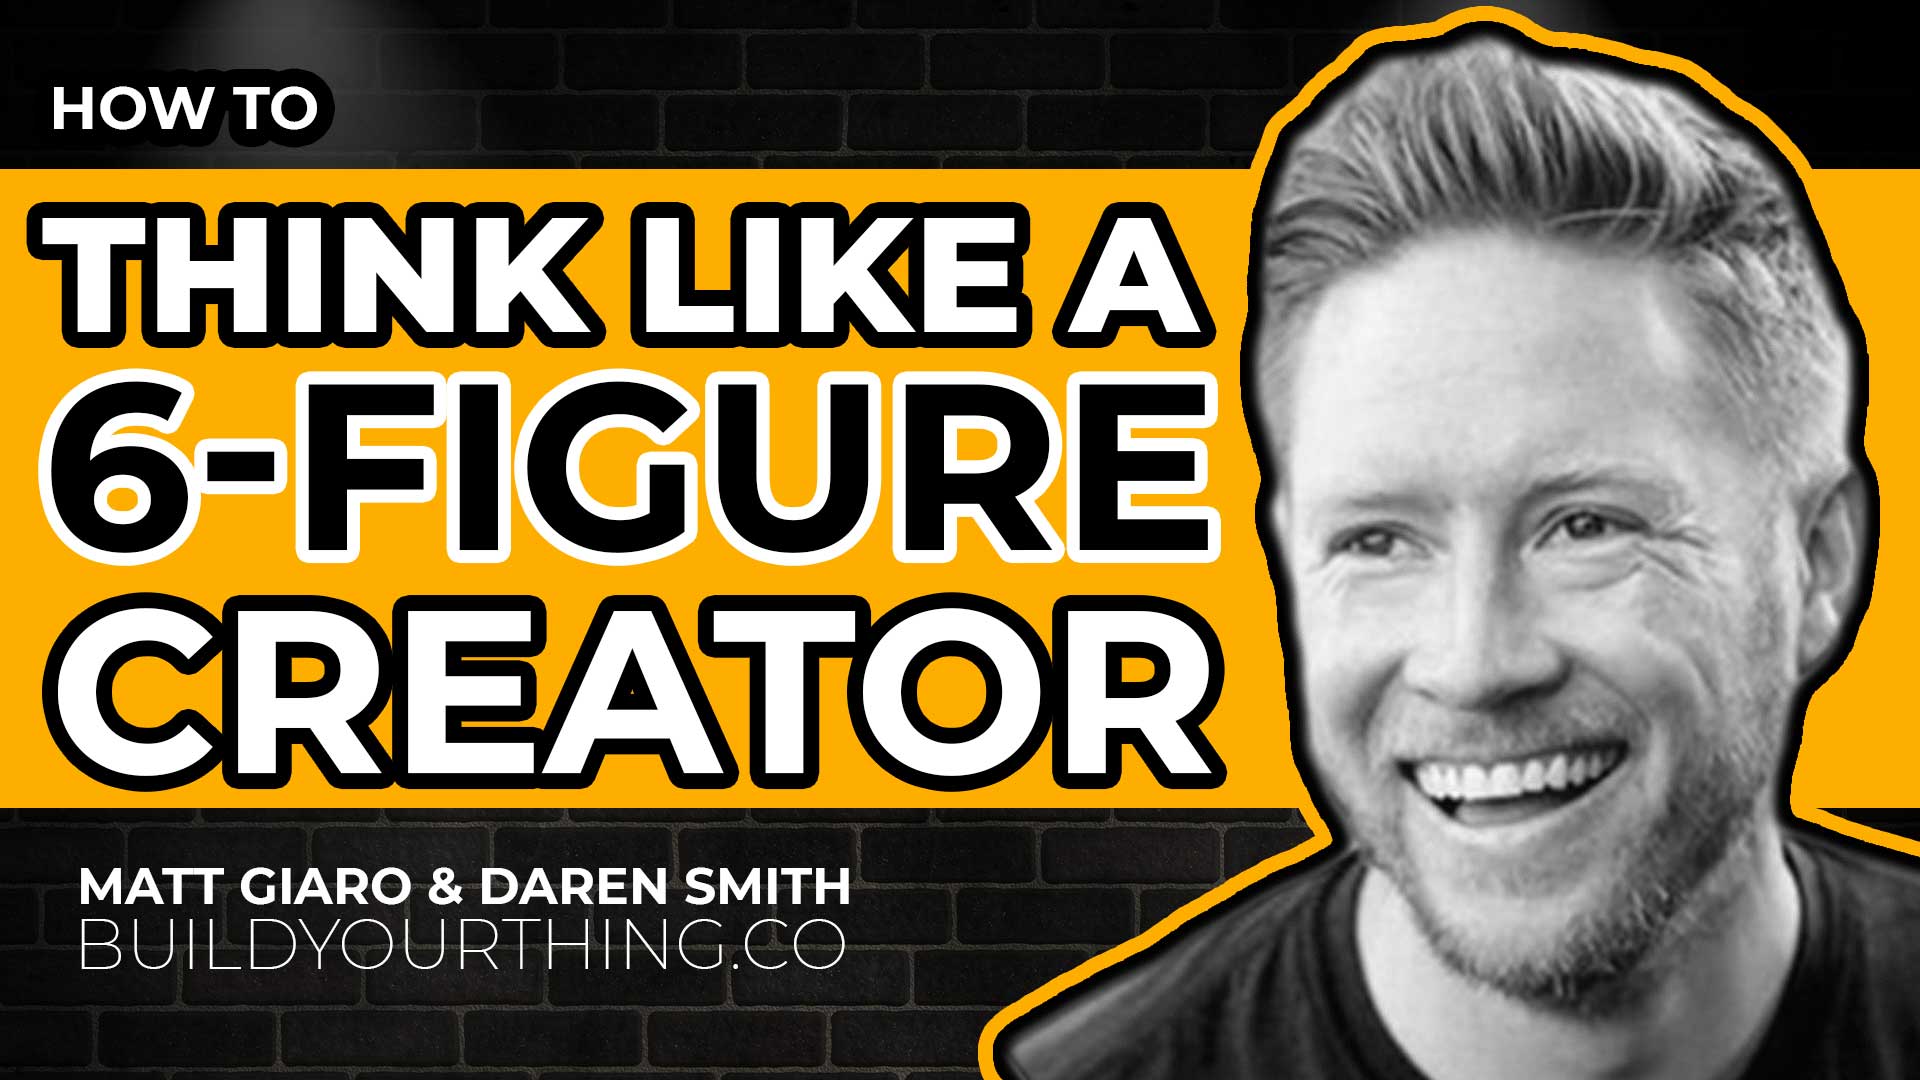 How to Think Like a 6 Figure Creator With Daren Smith